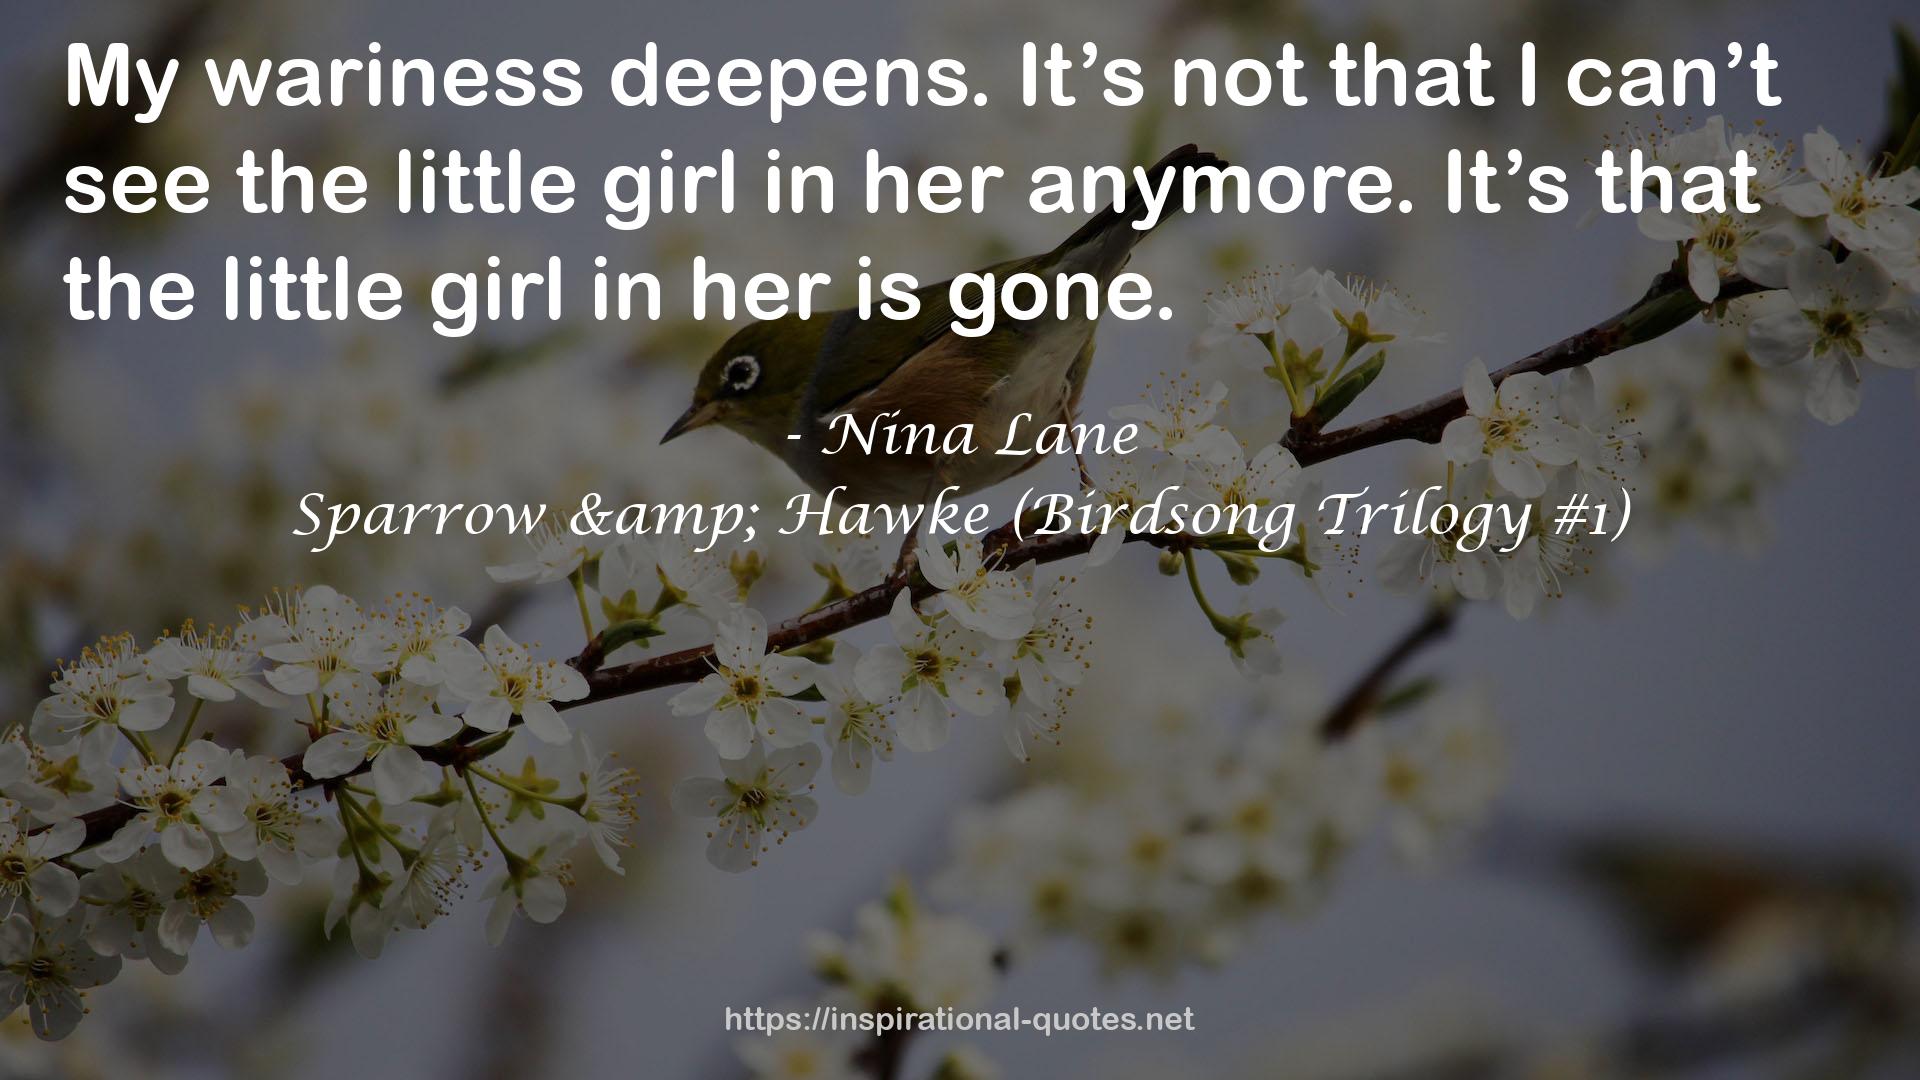 Sparrow & Hawke (Birdsong Trilogy #1) QUOTES